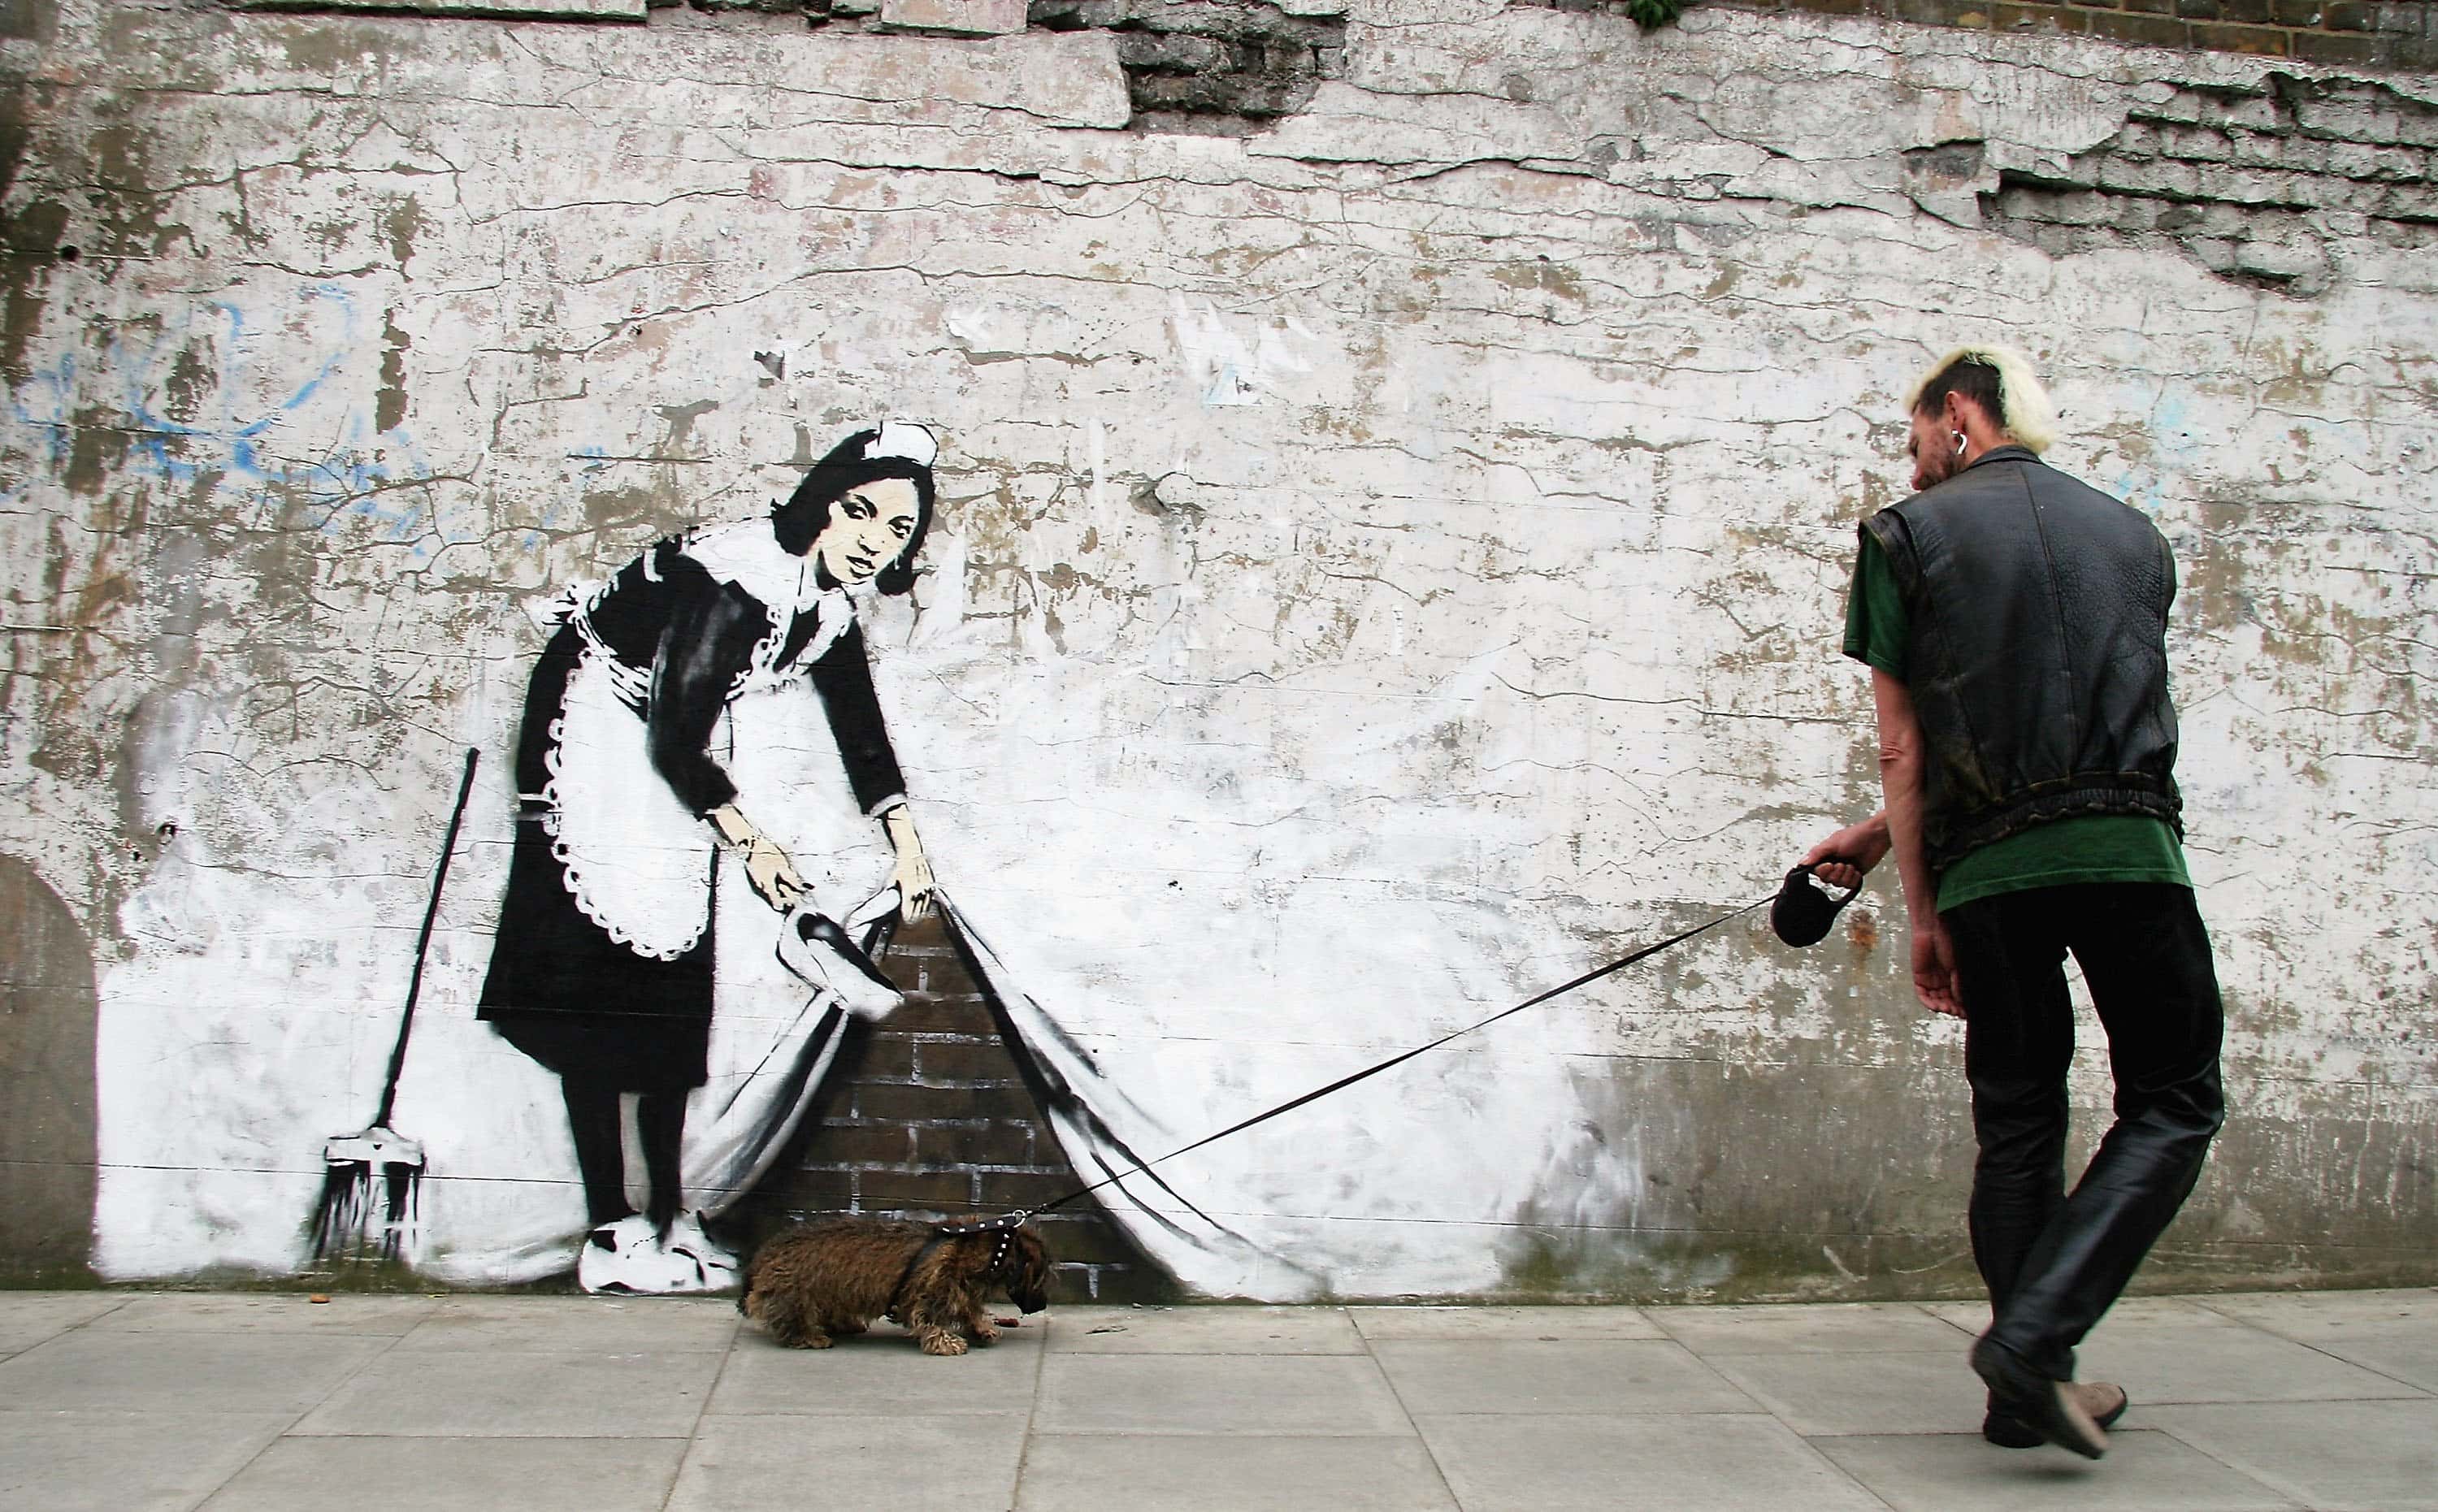 Cryptic Facts About Banksy The Mysterious Street Artist